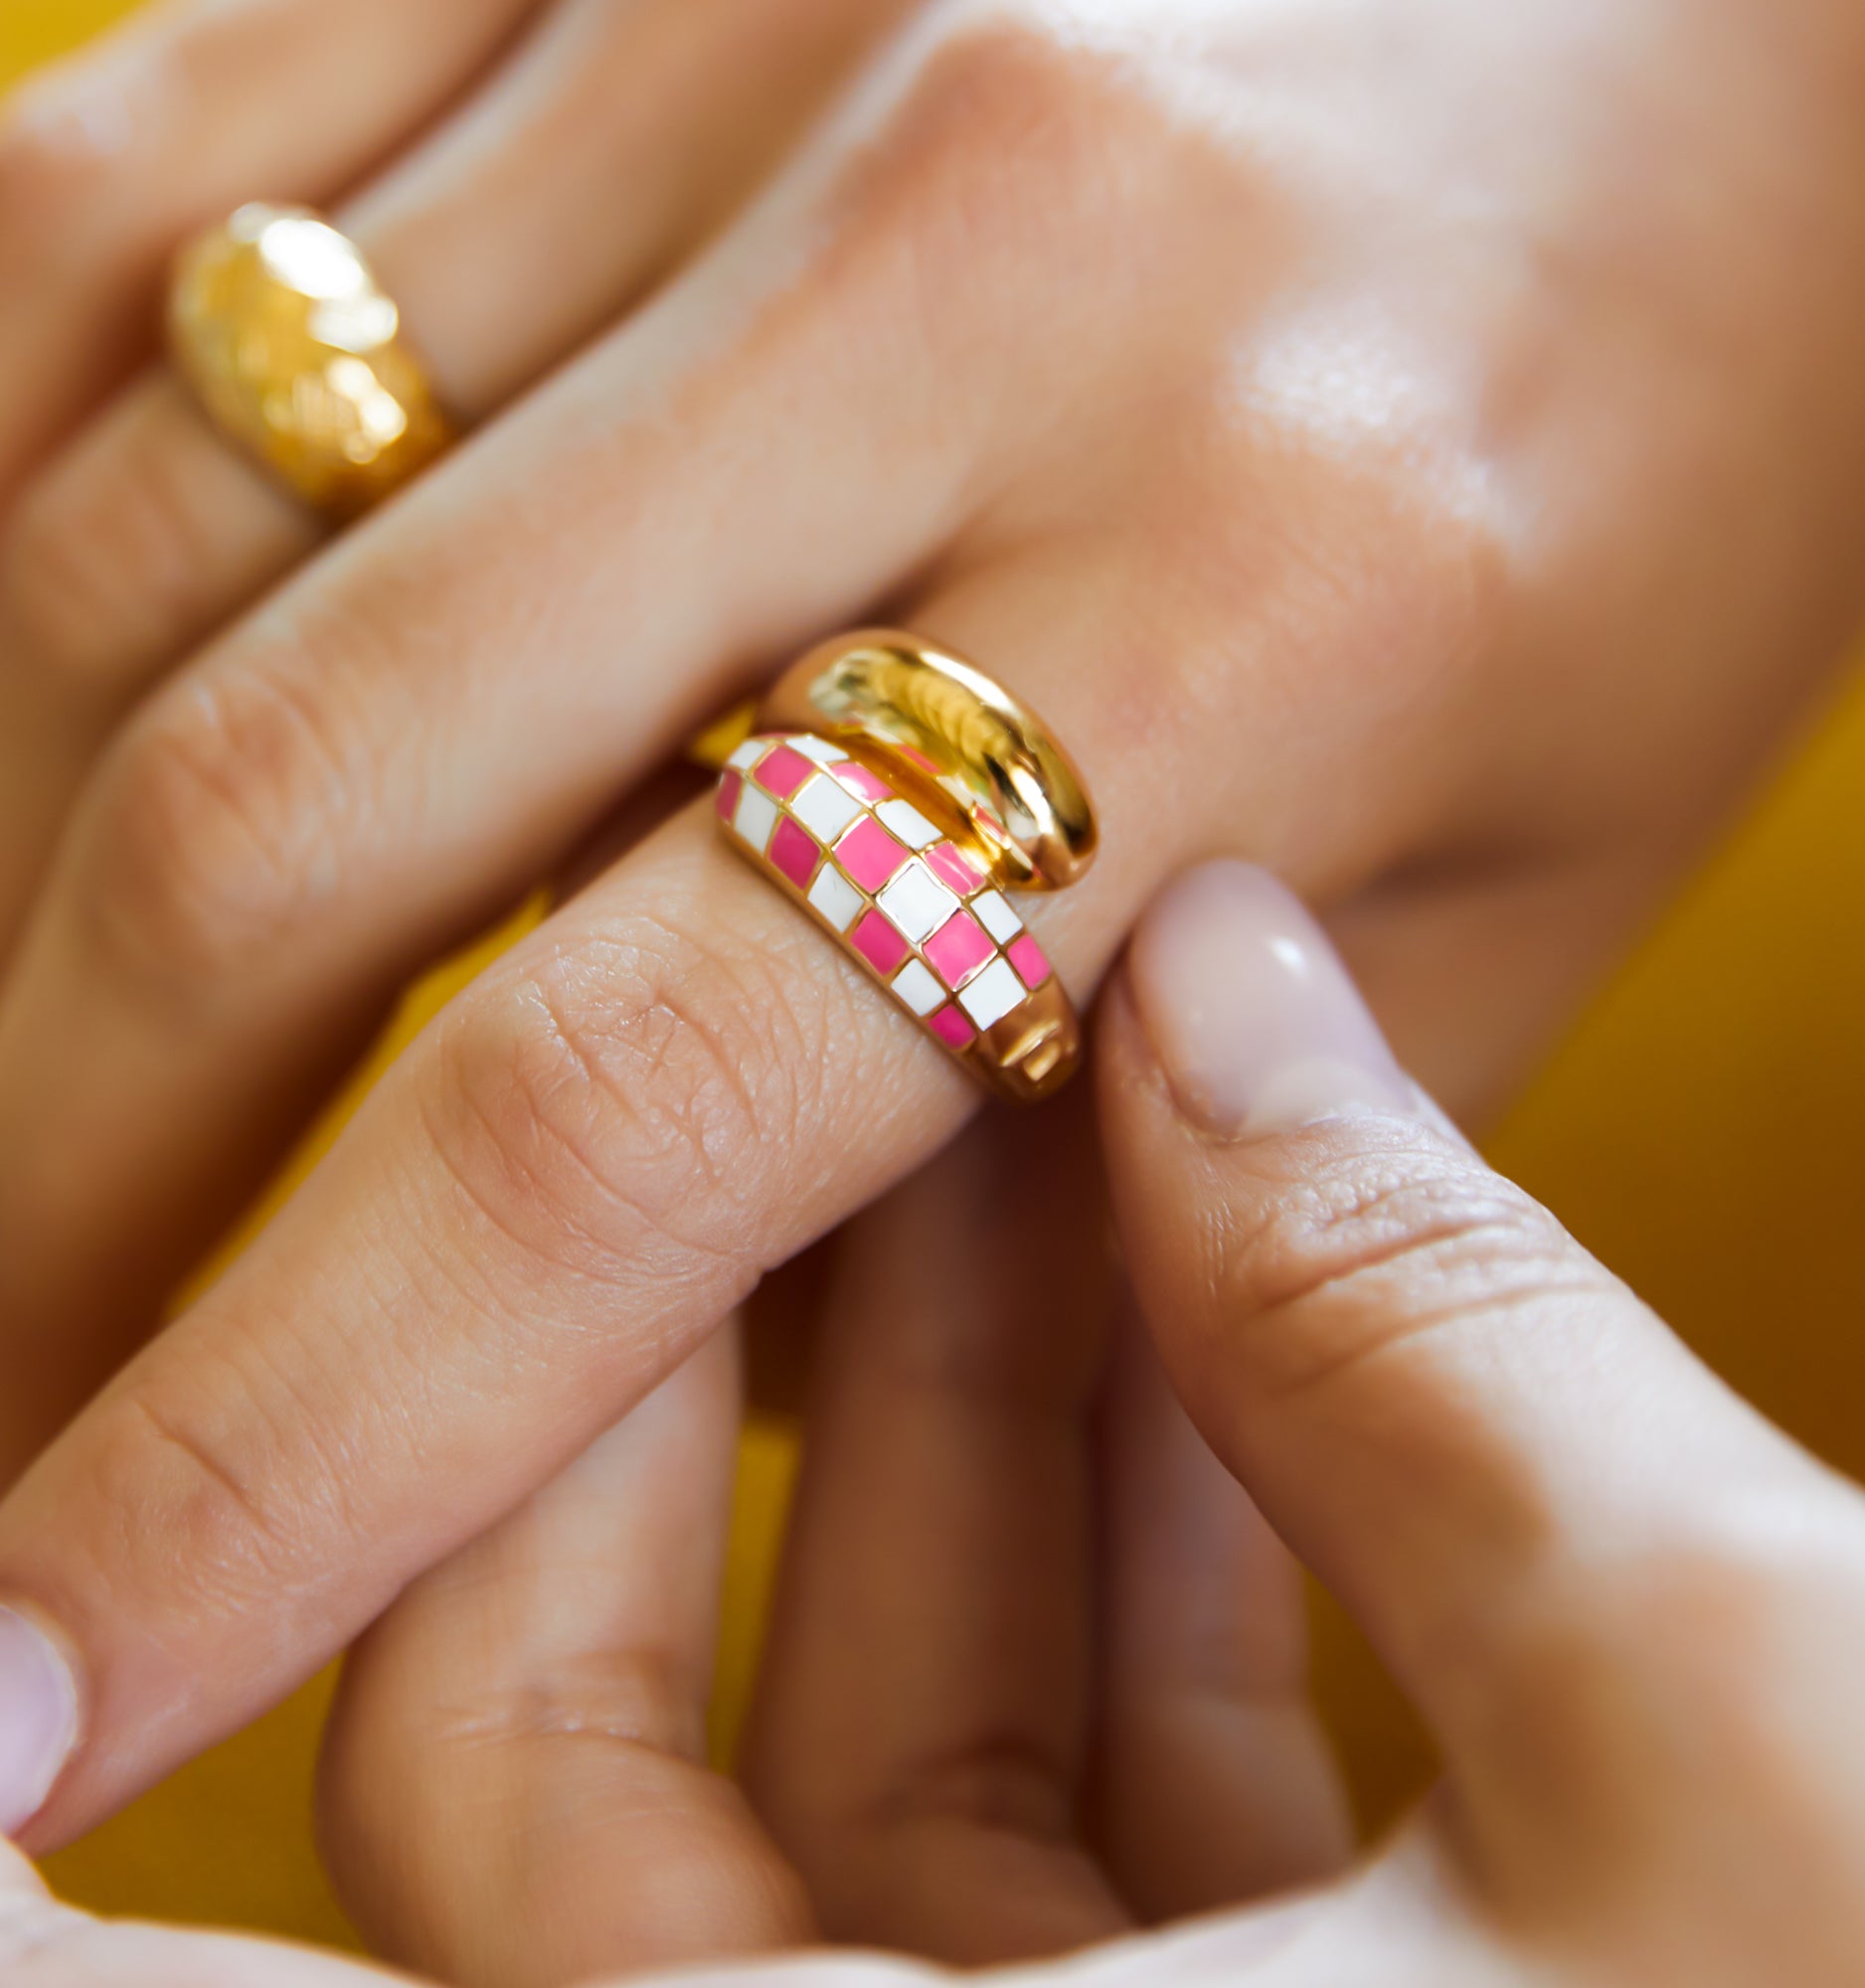 Wrap Checker Ring - Pink And White